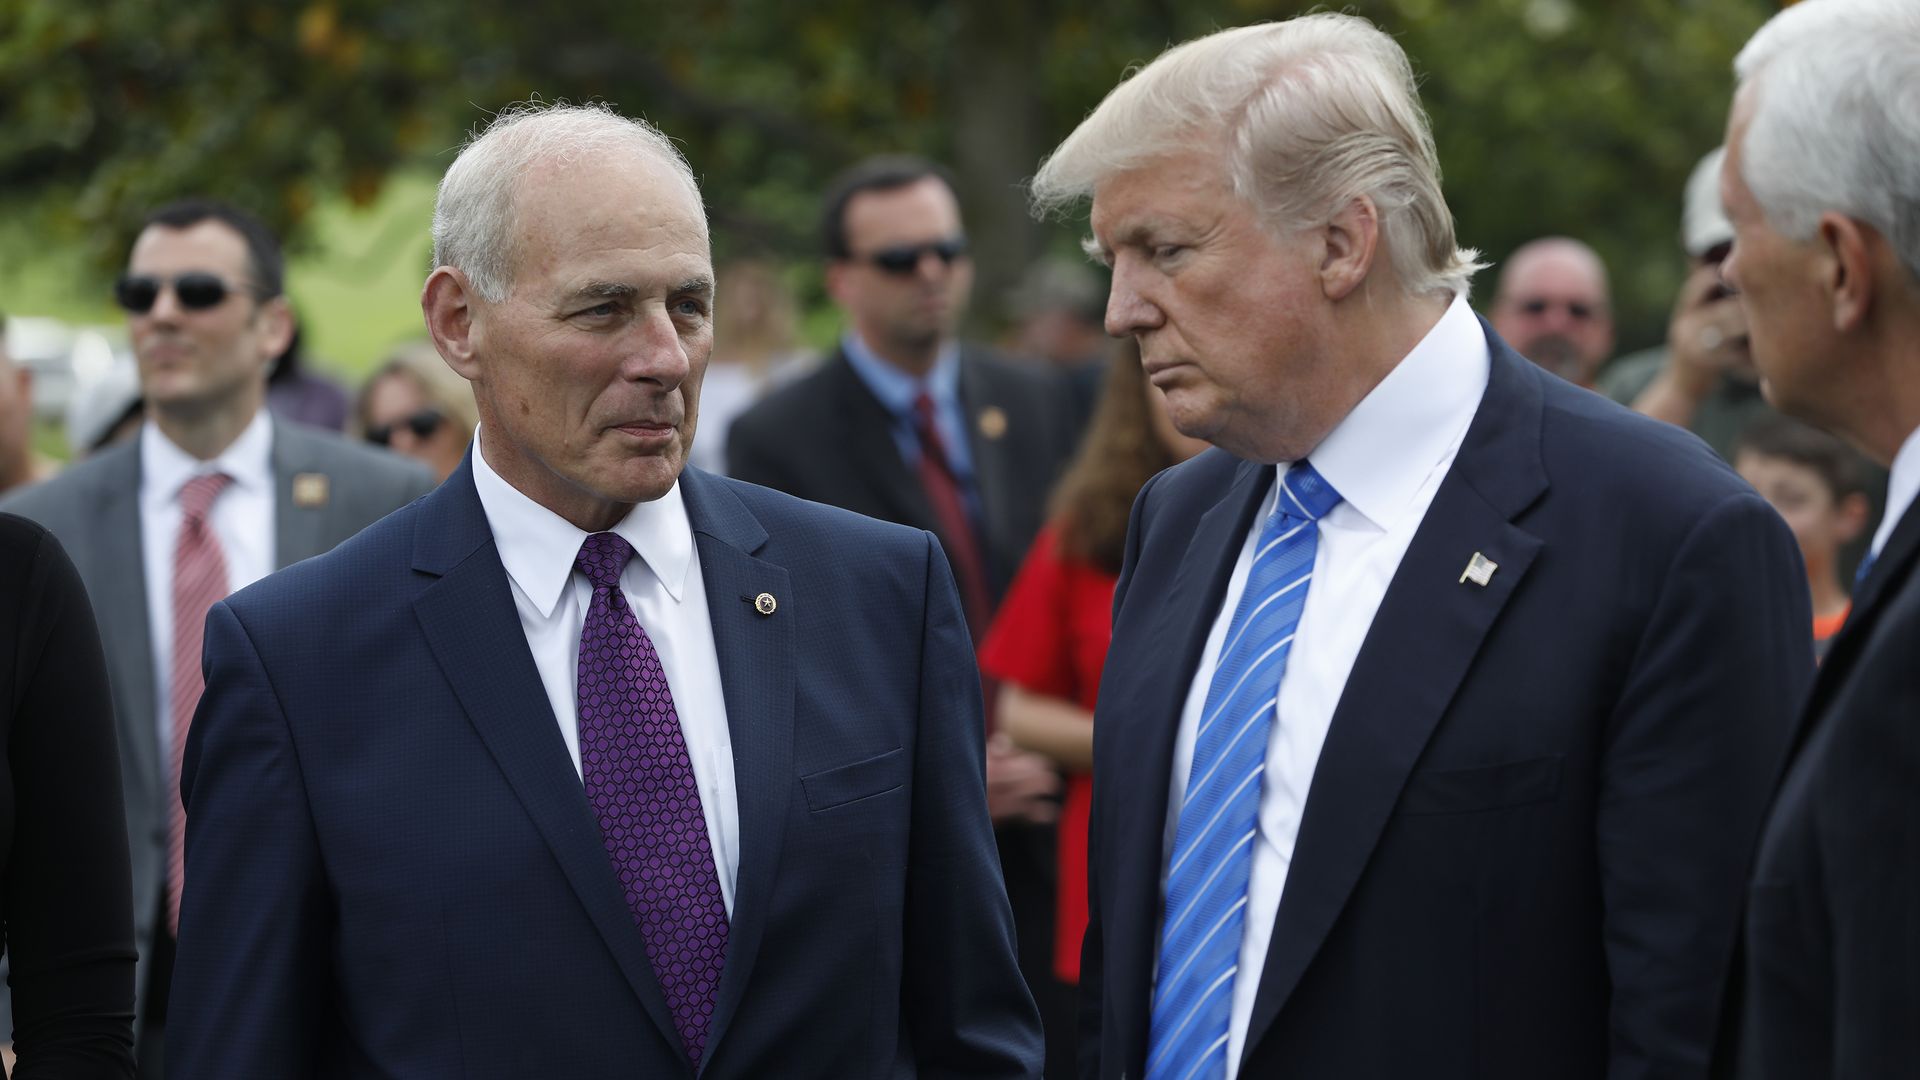 Trump and Kelly